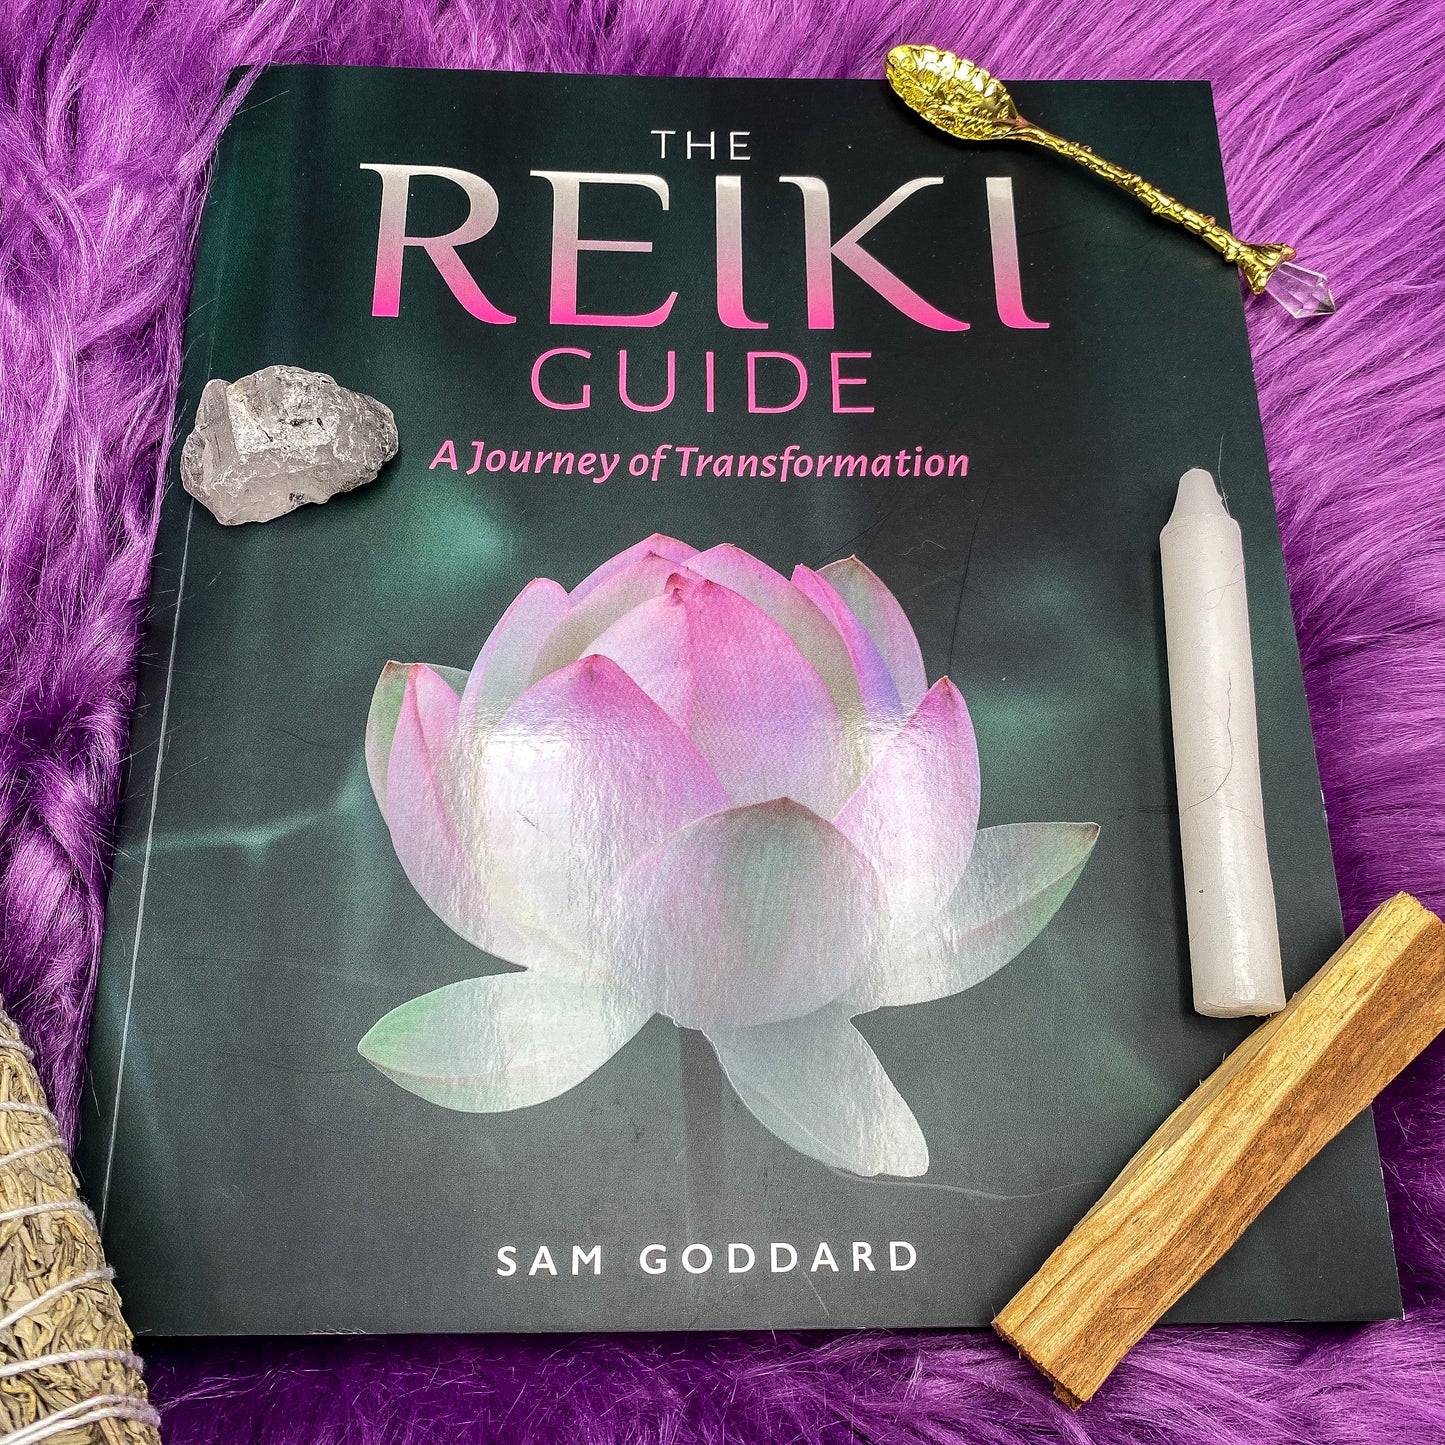 The Reiki Guide: A Journey of Transformation by Sam Goddard